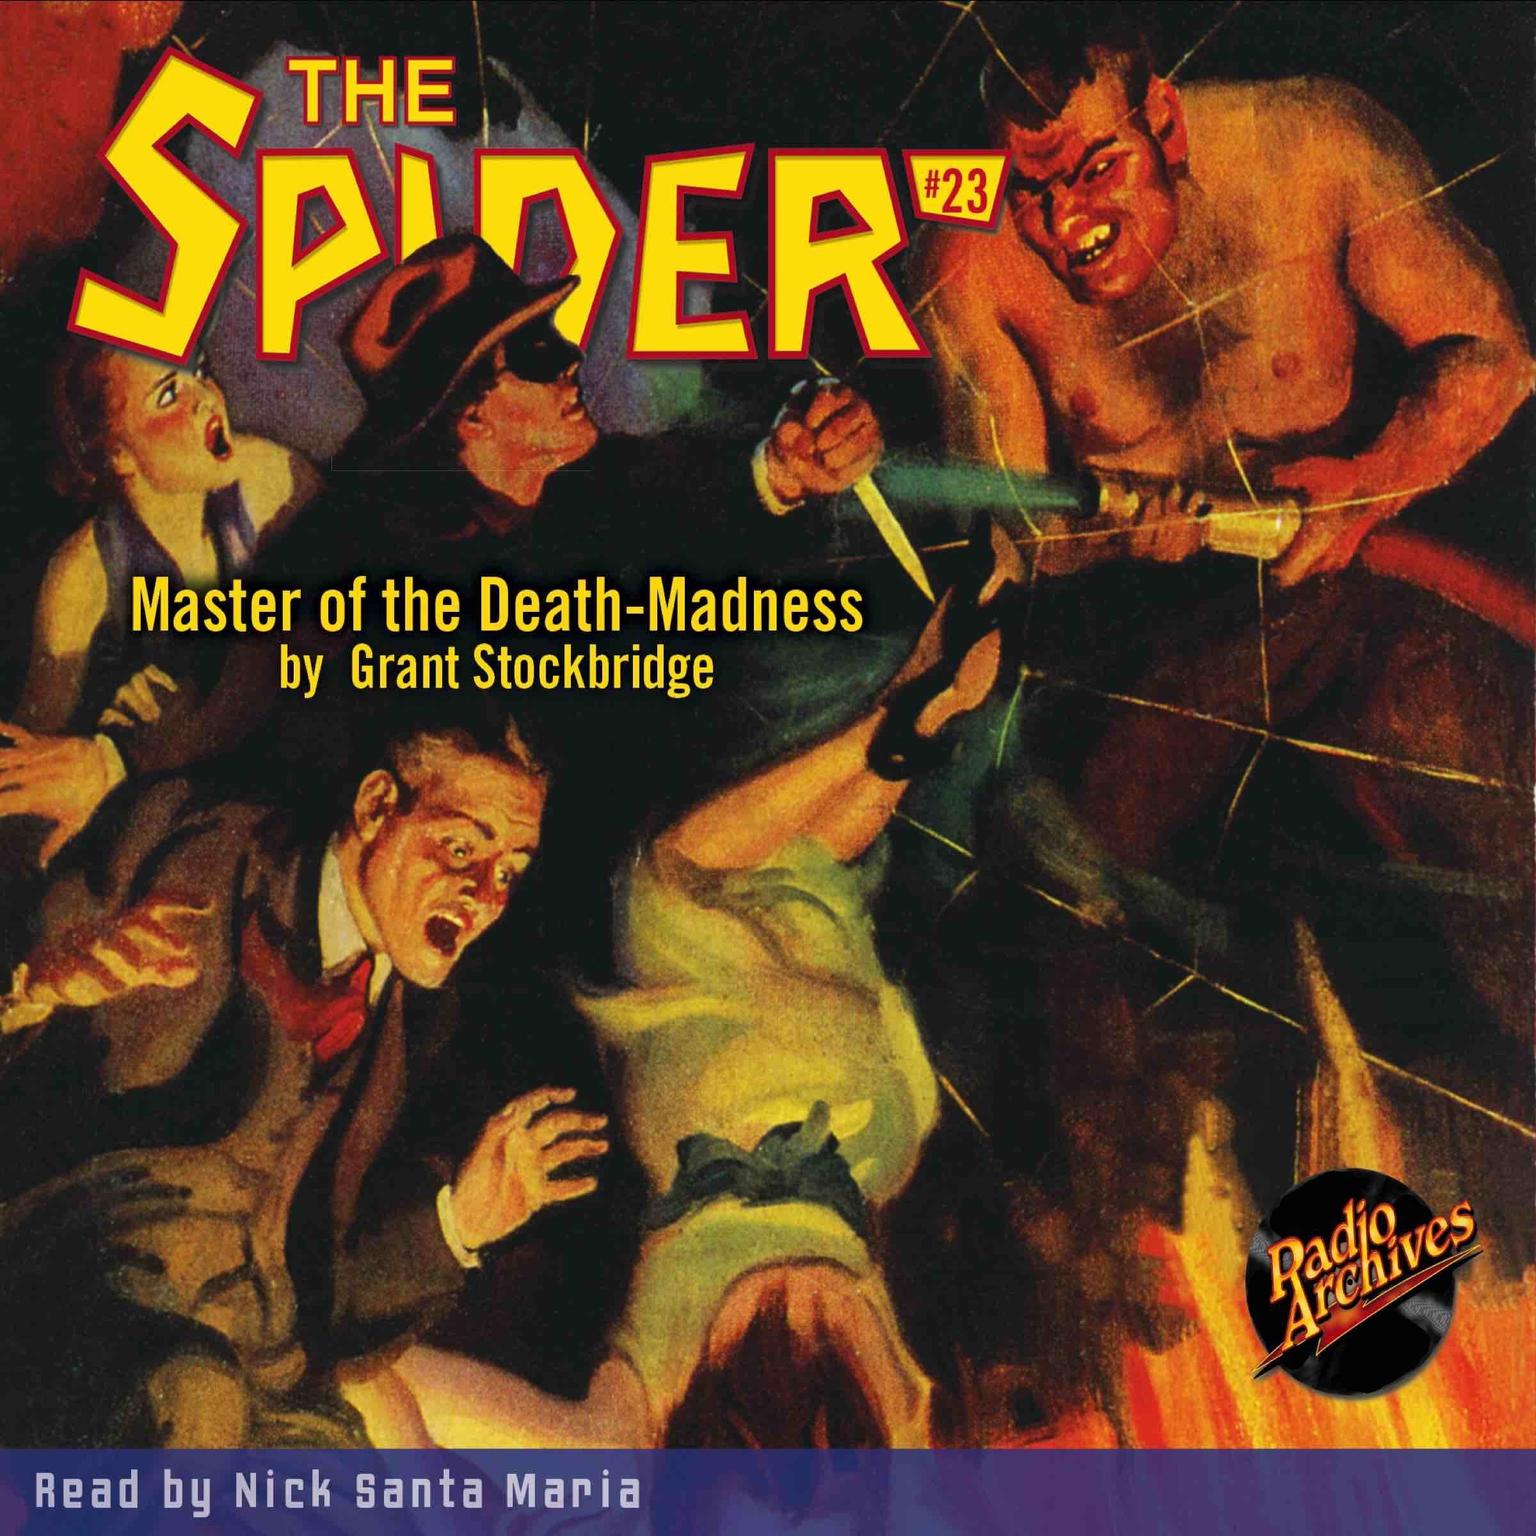 Spider #23, The: Master of the Death-Madness Audiobook, by Grant Stockbridge